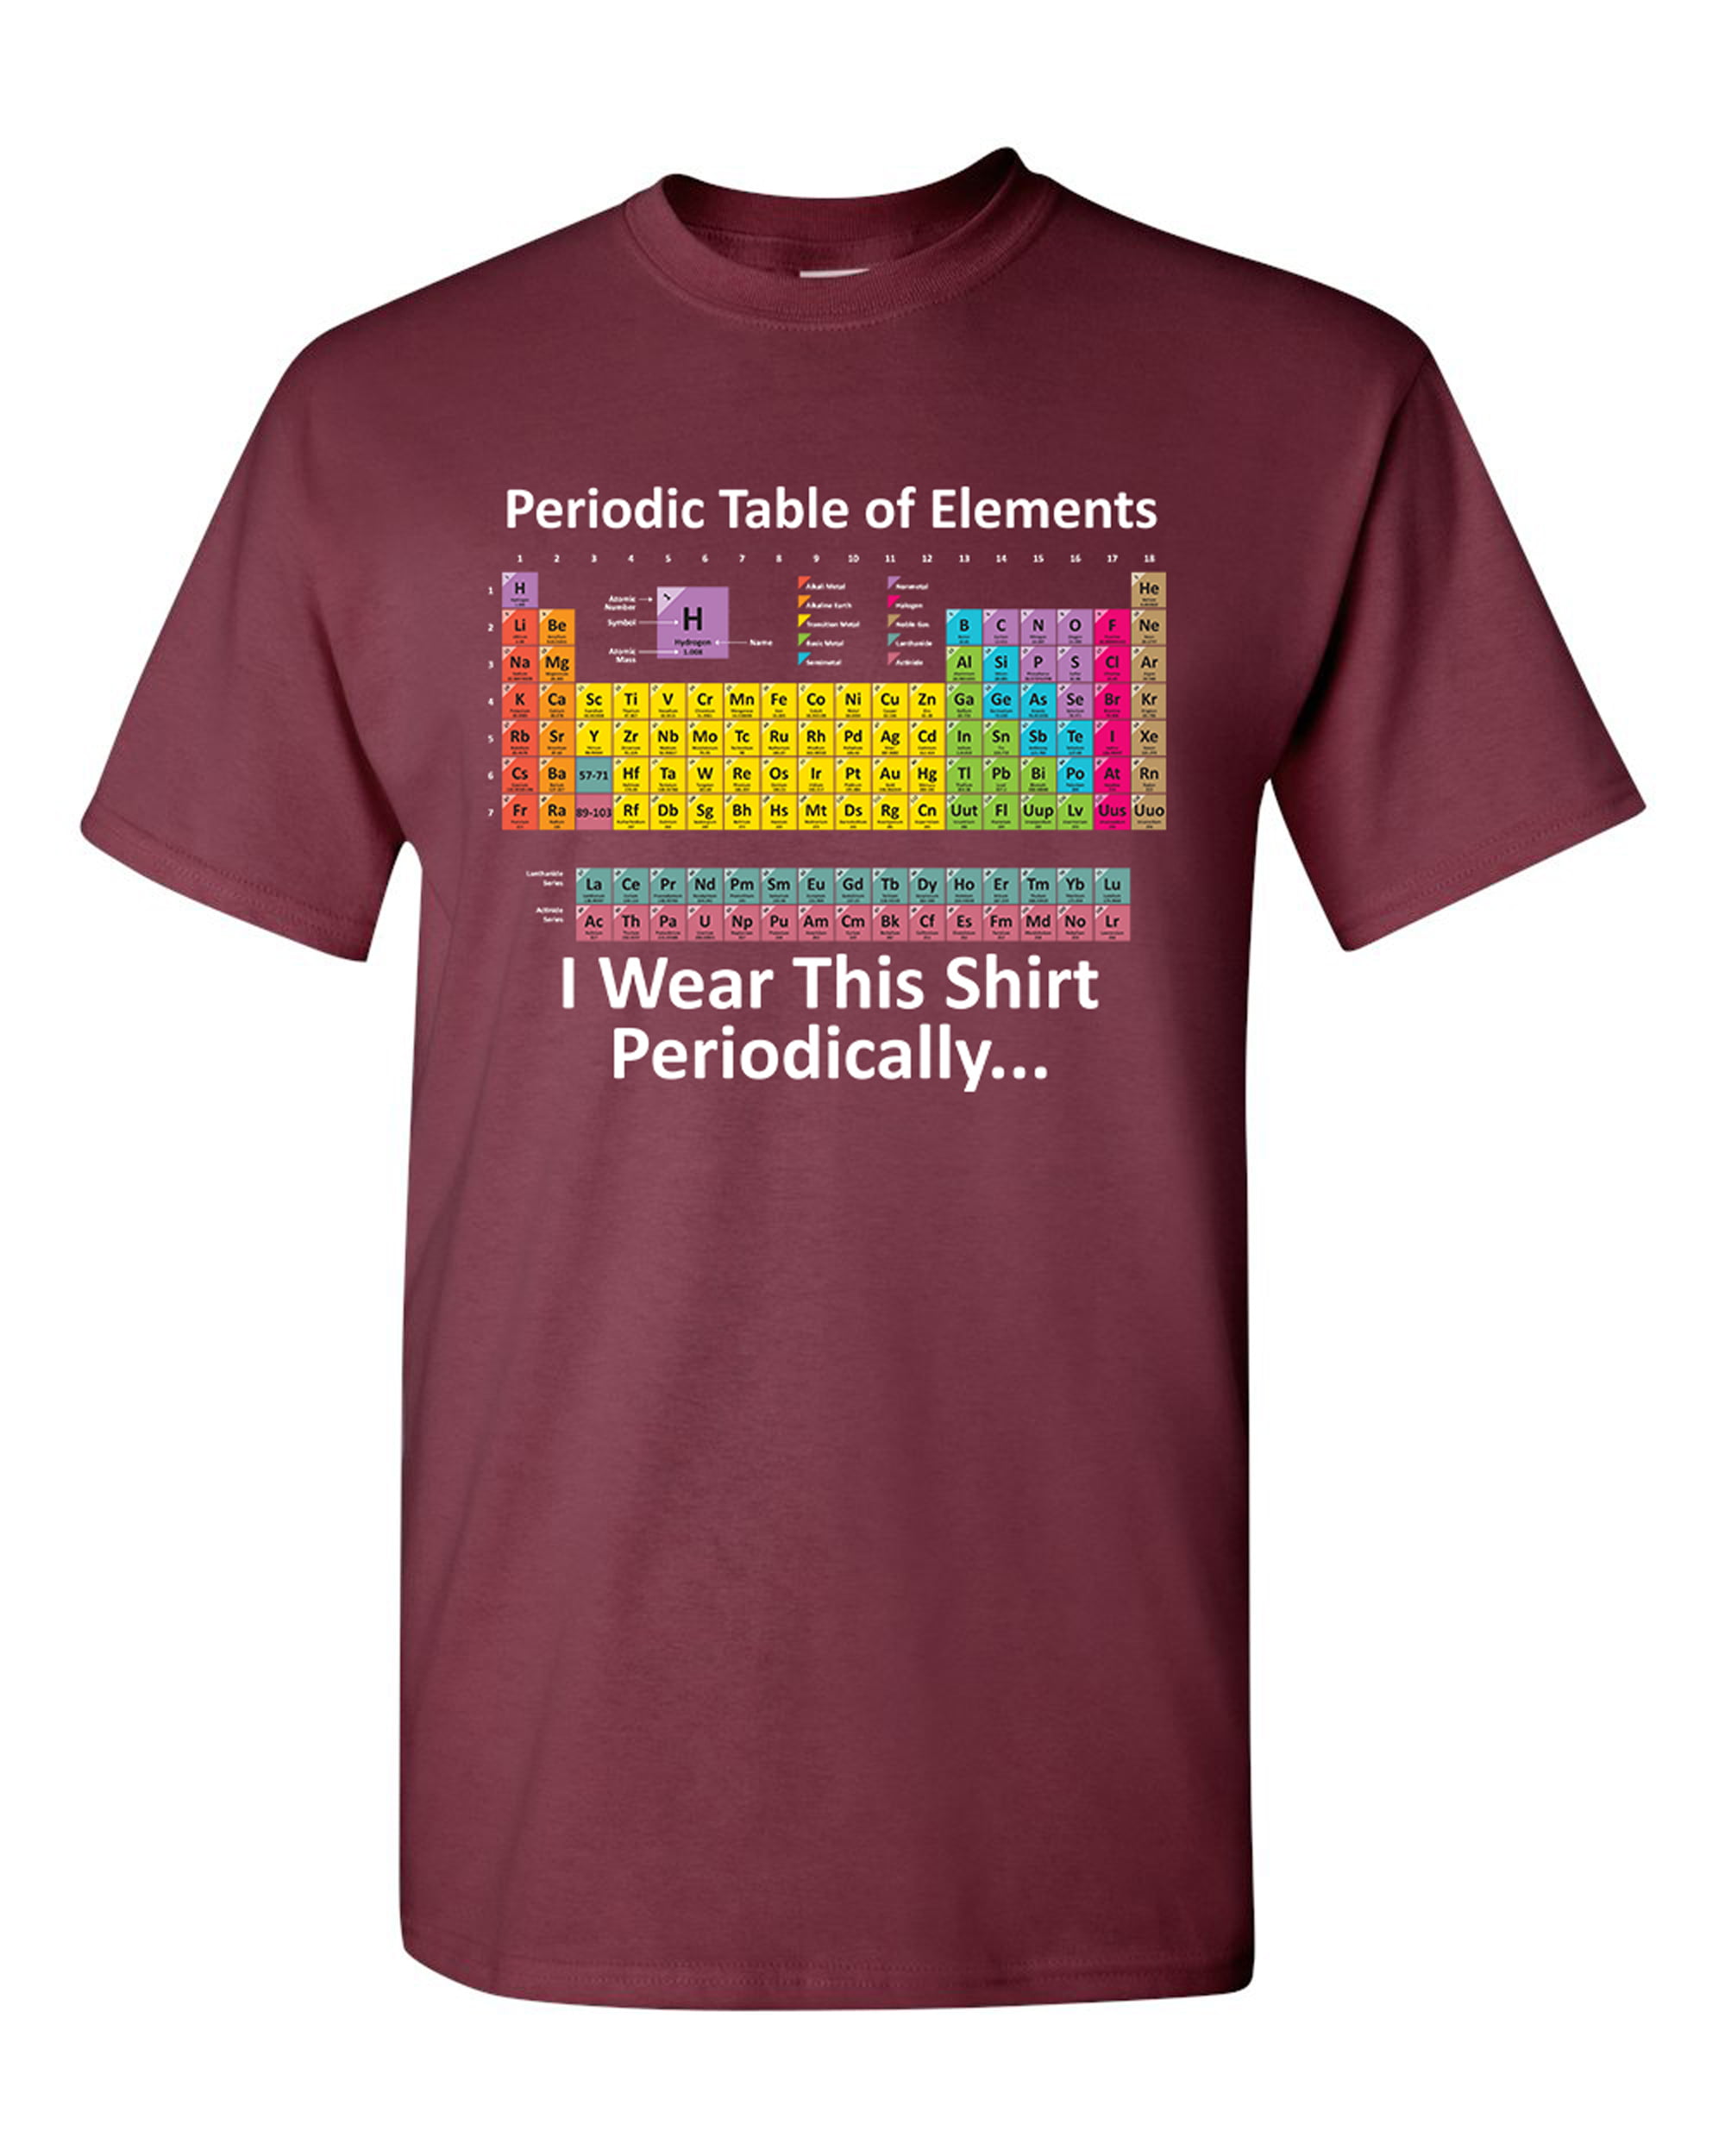 City Shirts Periodic Table Of Elements Funny Humor Dt Adult T Shirt Tee Walmart Com - periodic table roblox